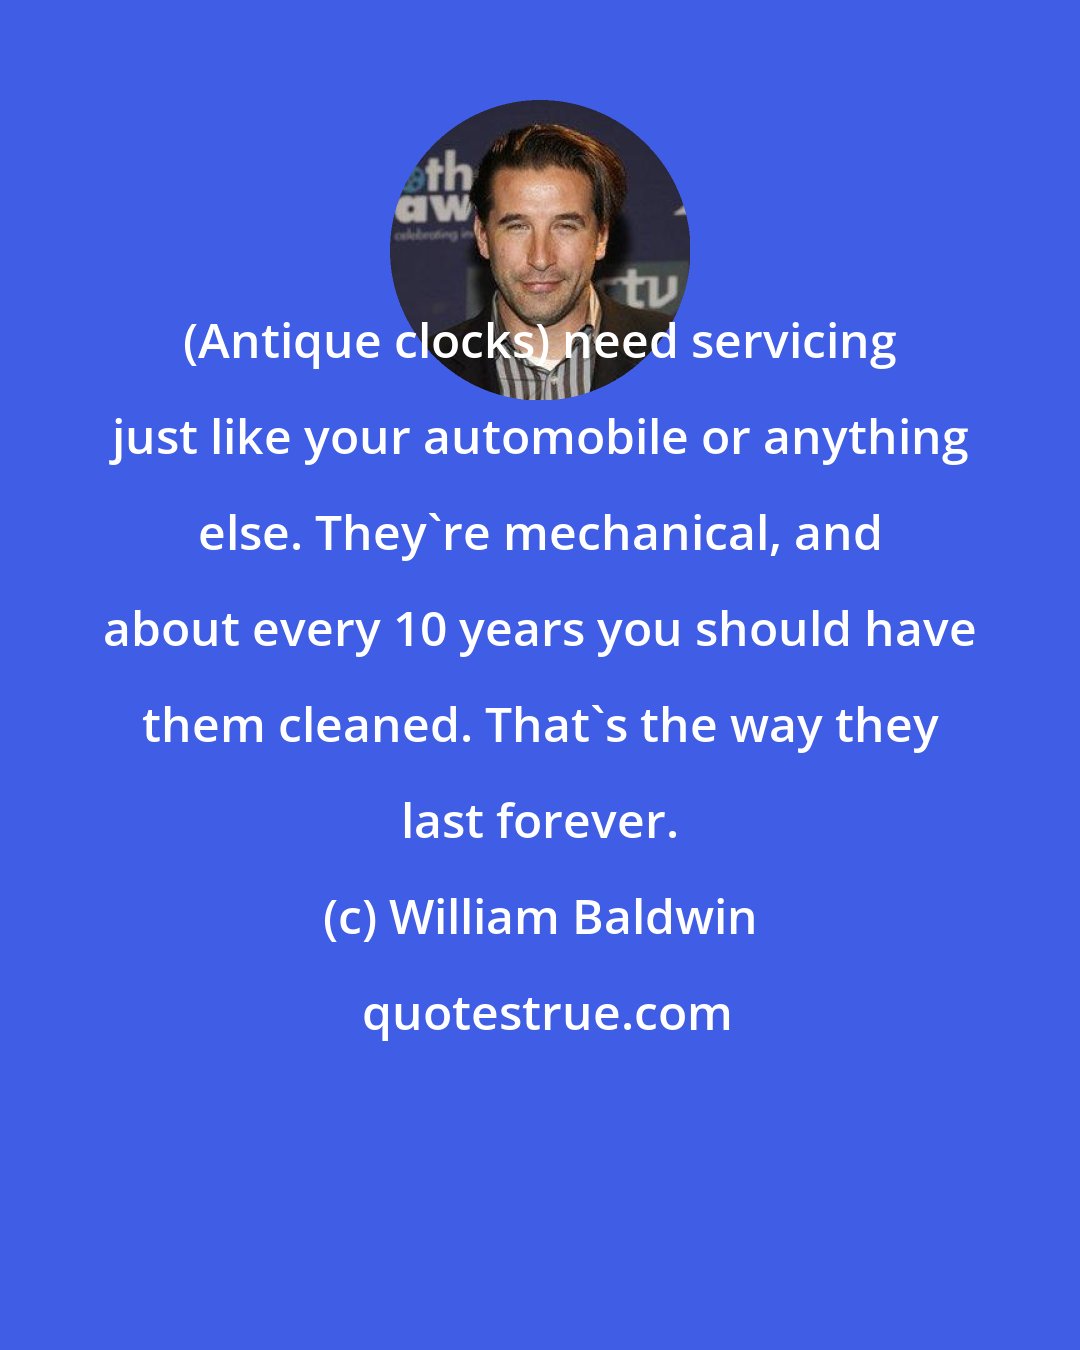 William Baldwin: (Antique clocks) need servicing just like your automobile or anything else. They're mechanical, and about every 10 years you should have them cleaned. That's the way they last forever.